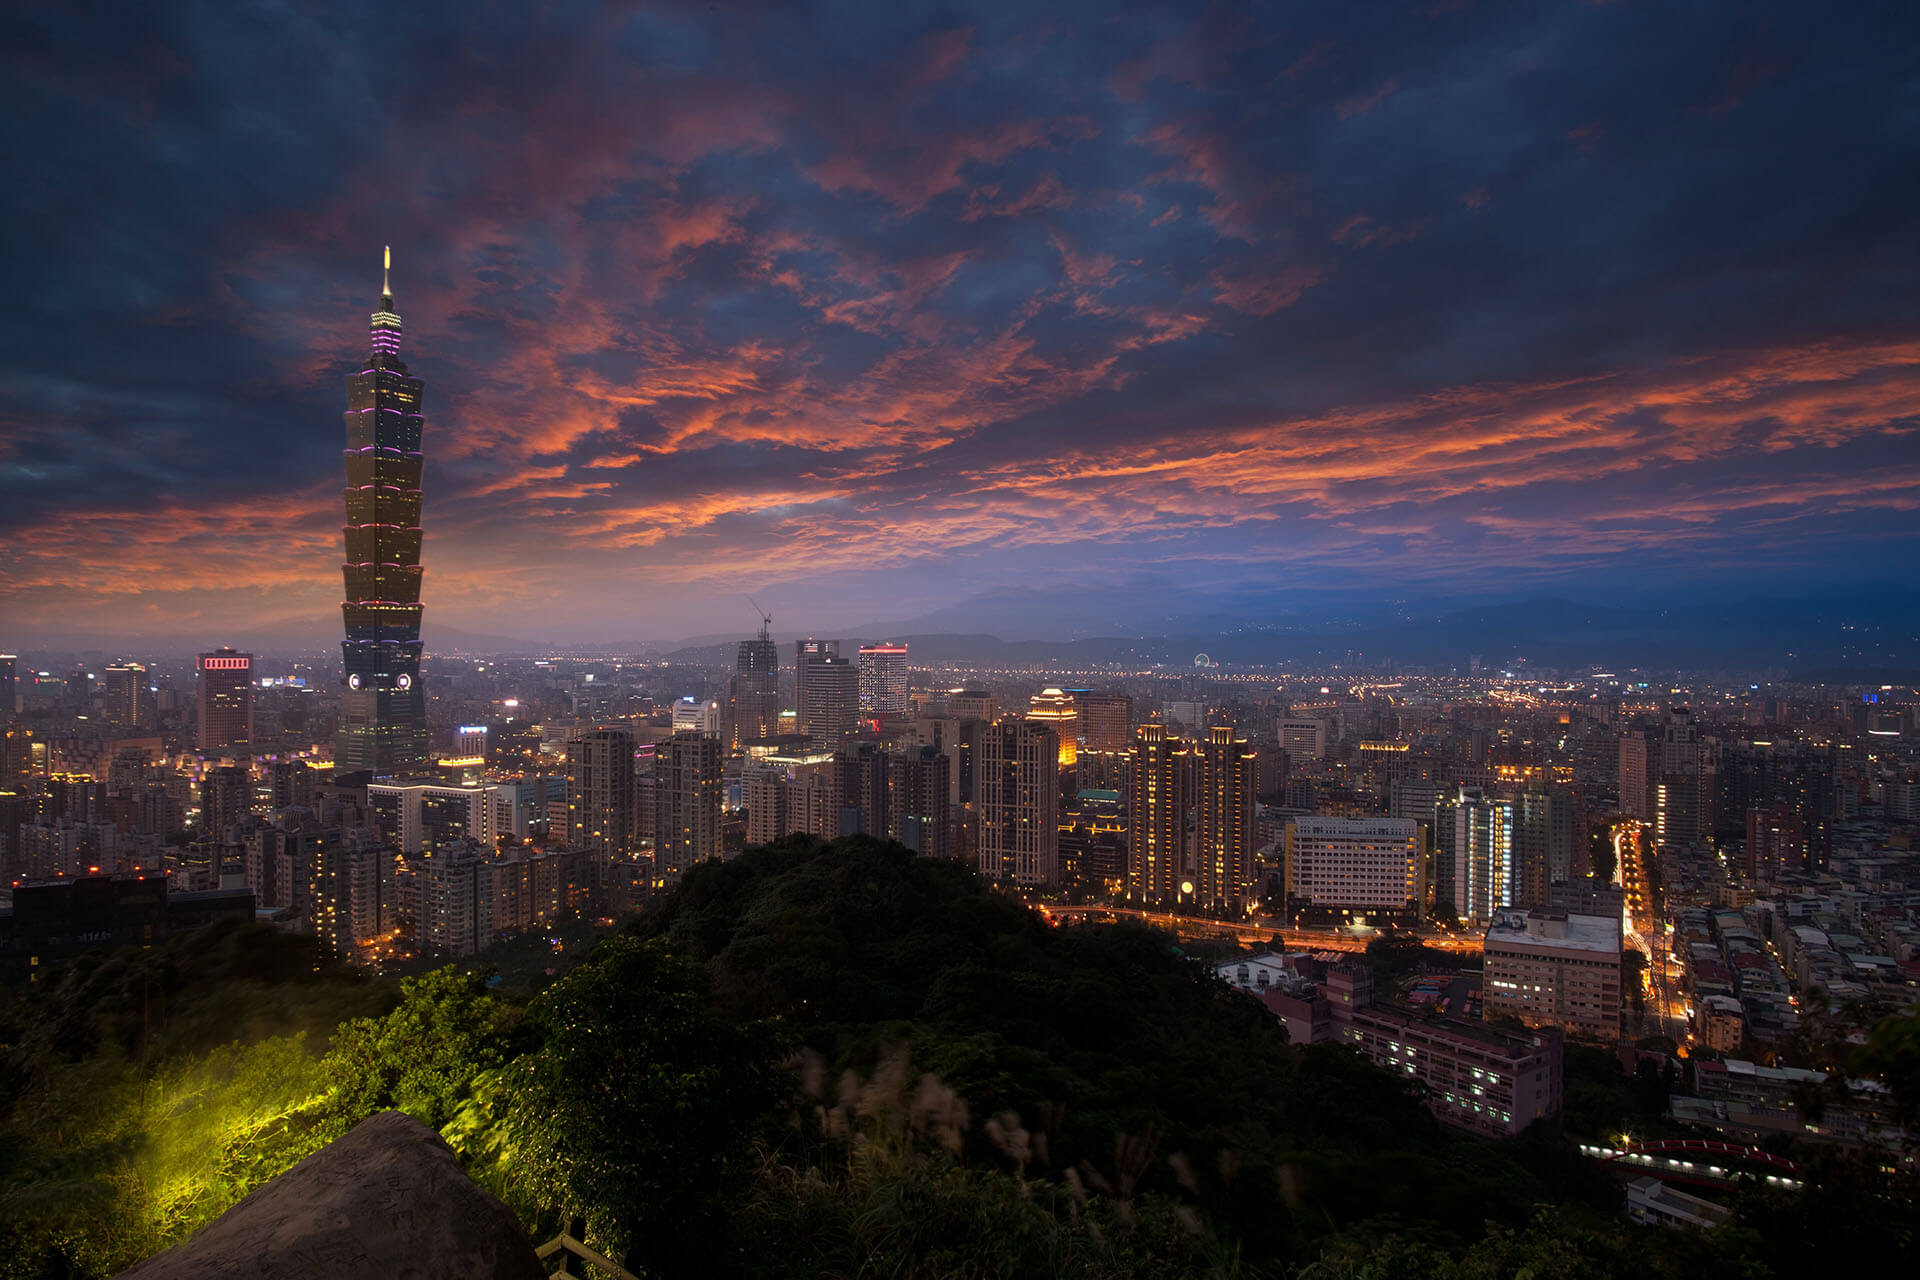 Taiwan: Pilot Visa-Free Travel Program for Foreign Nationals